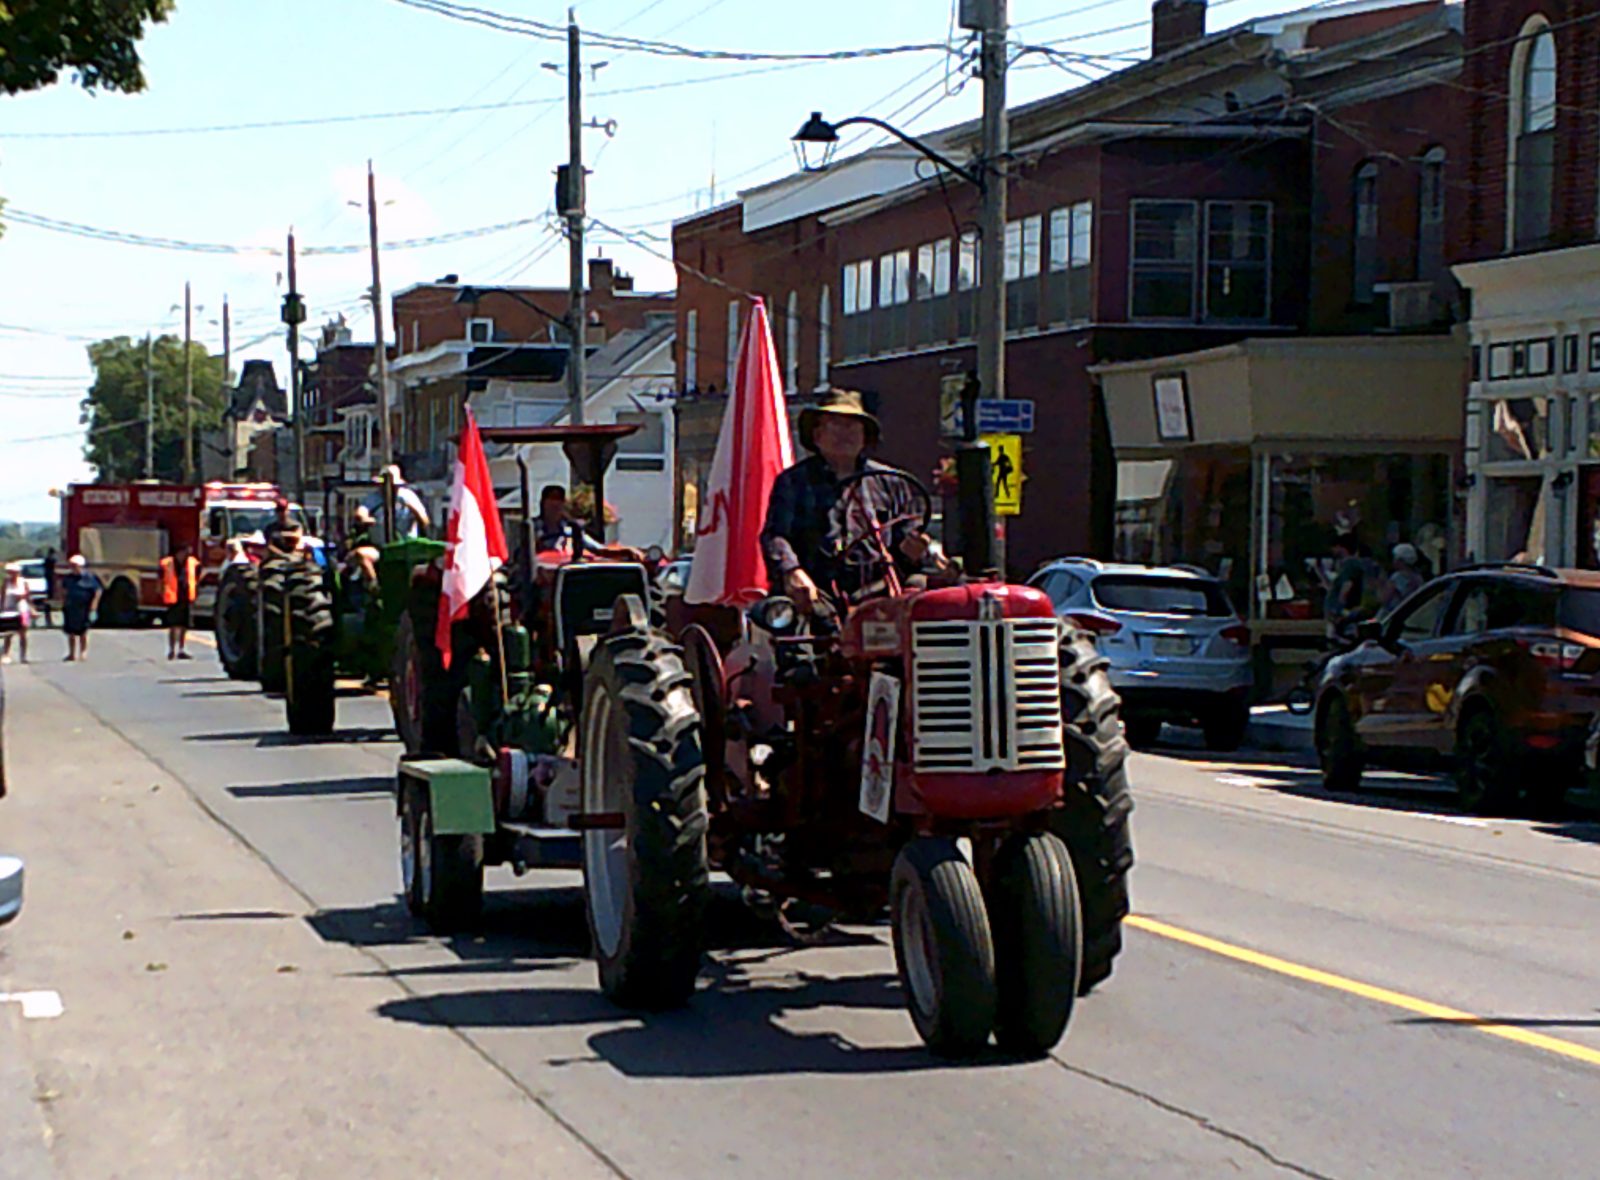 Tractors take over the streets